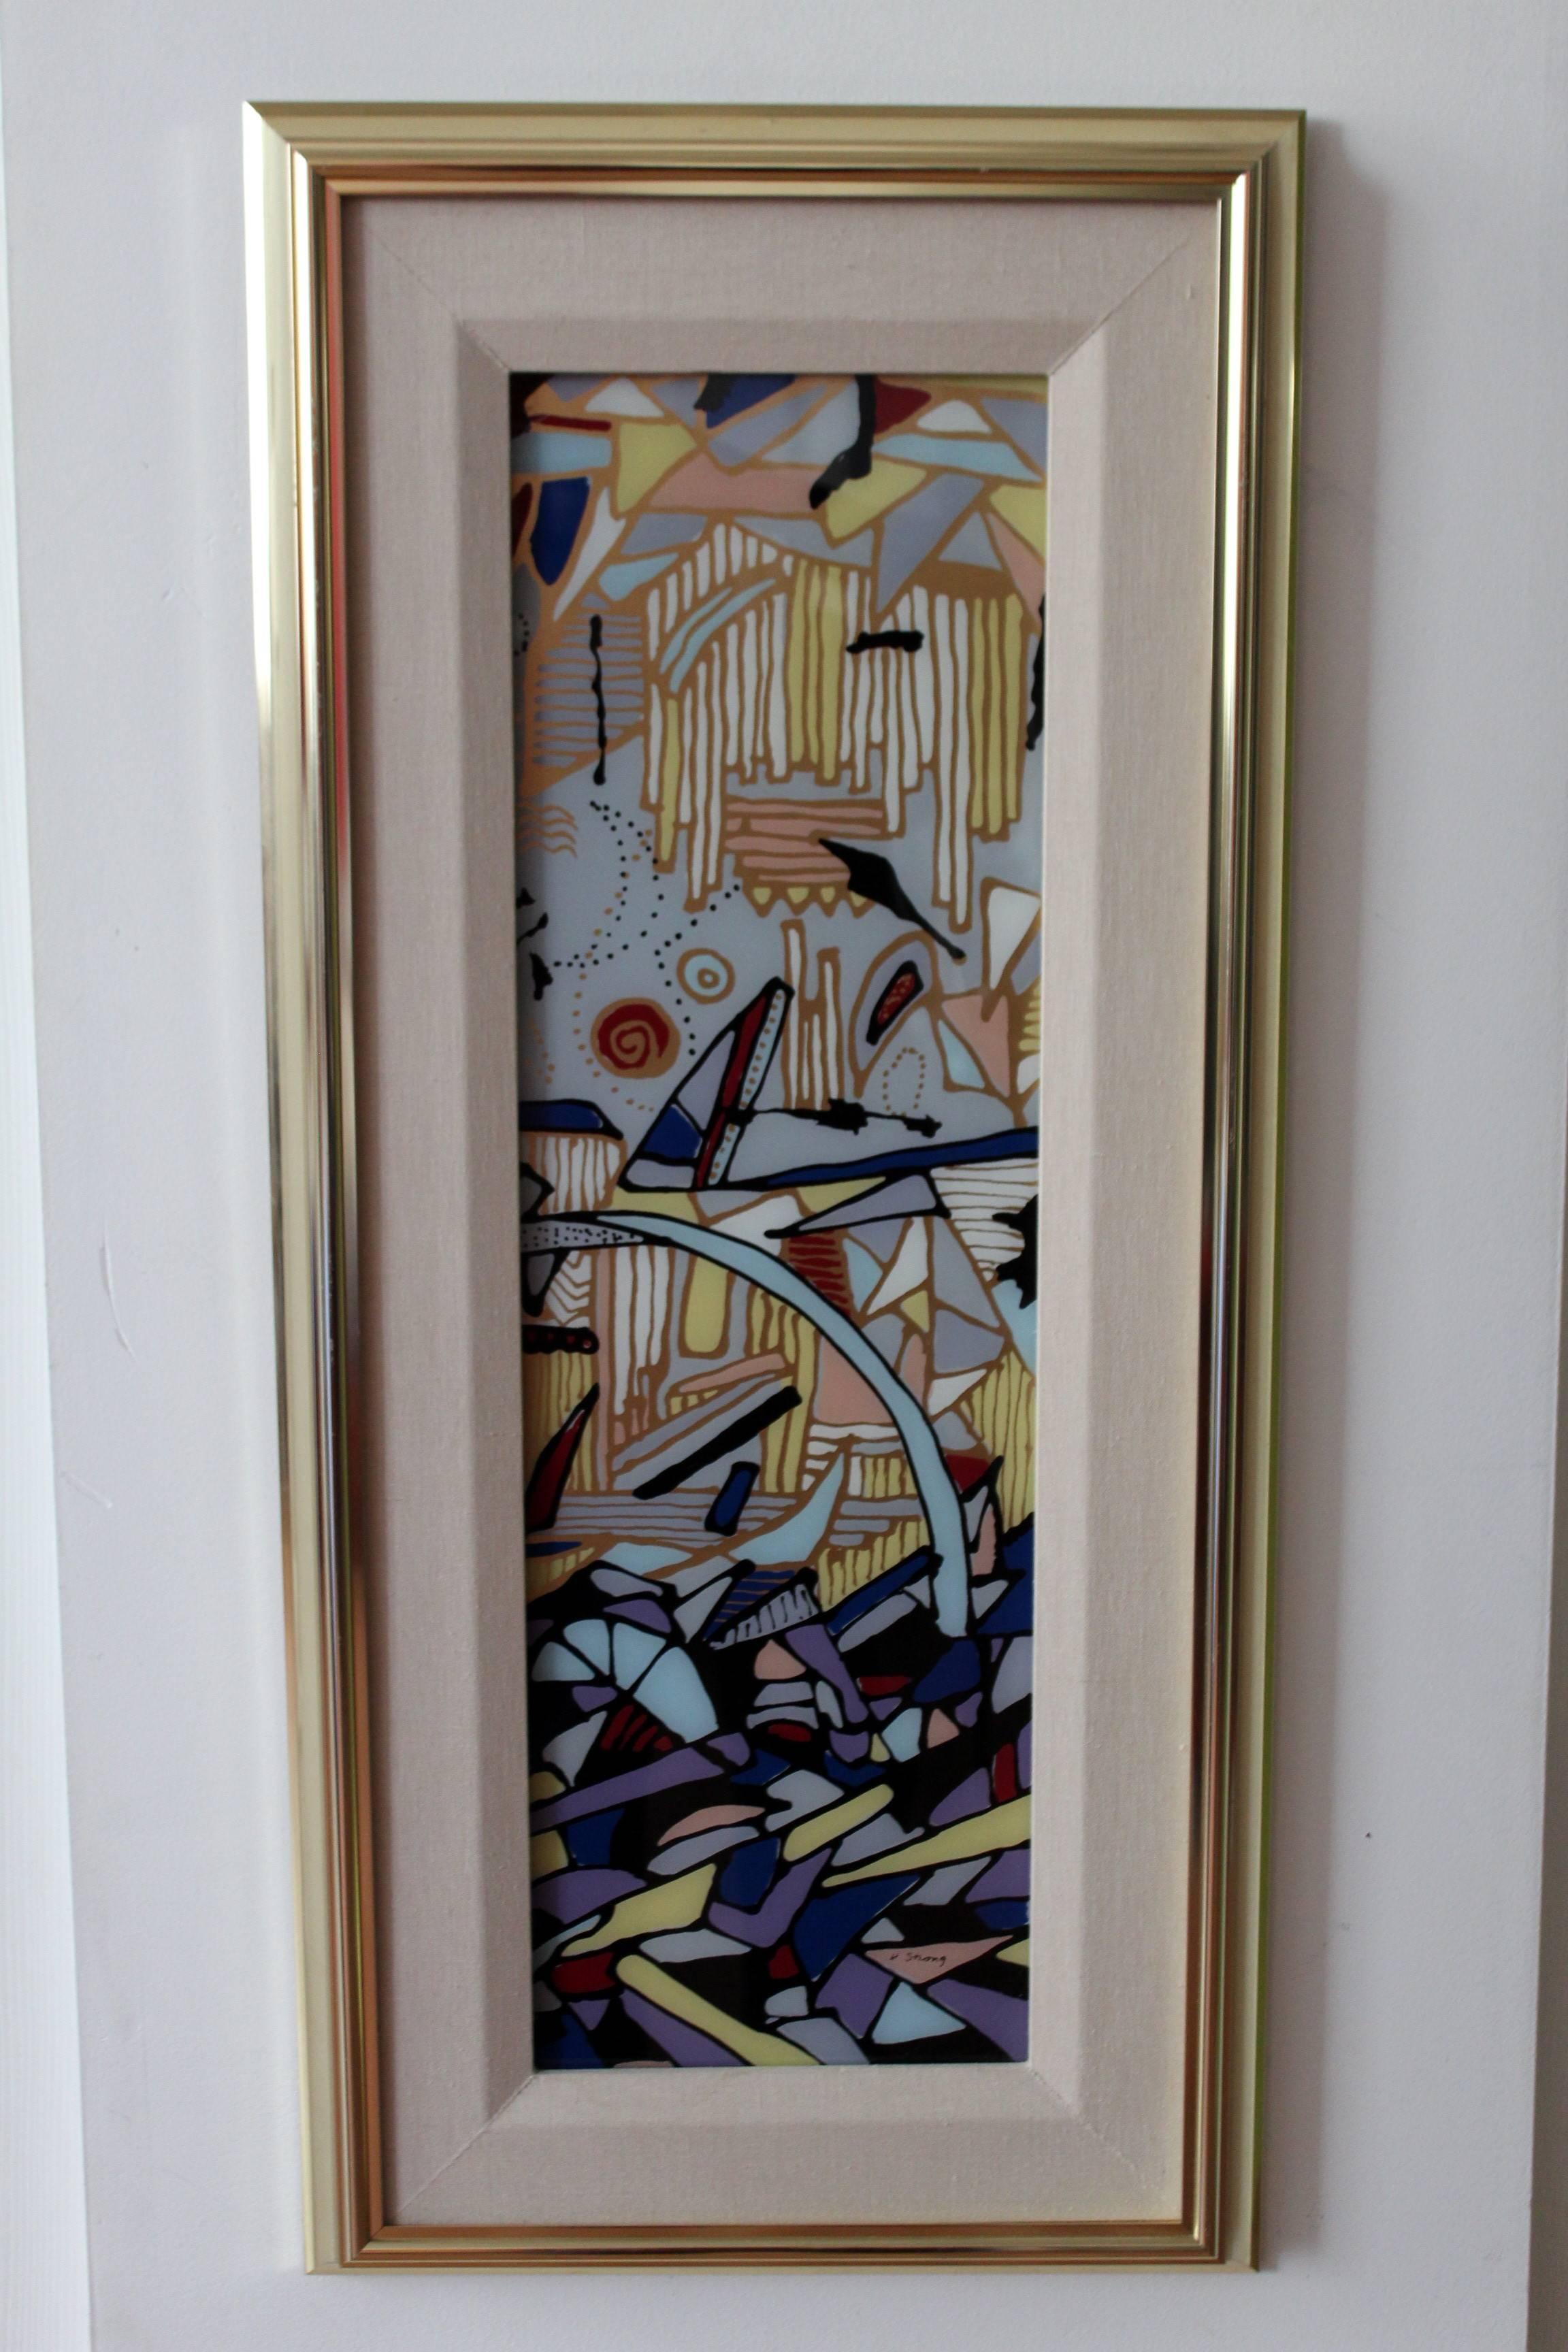 Rarely available on the open market is this Harris G Strong Inc. Stunning reverse glass painting. Back is signed 